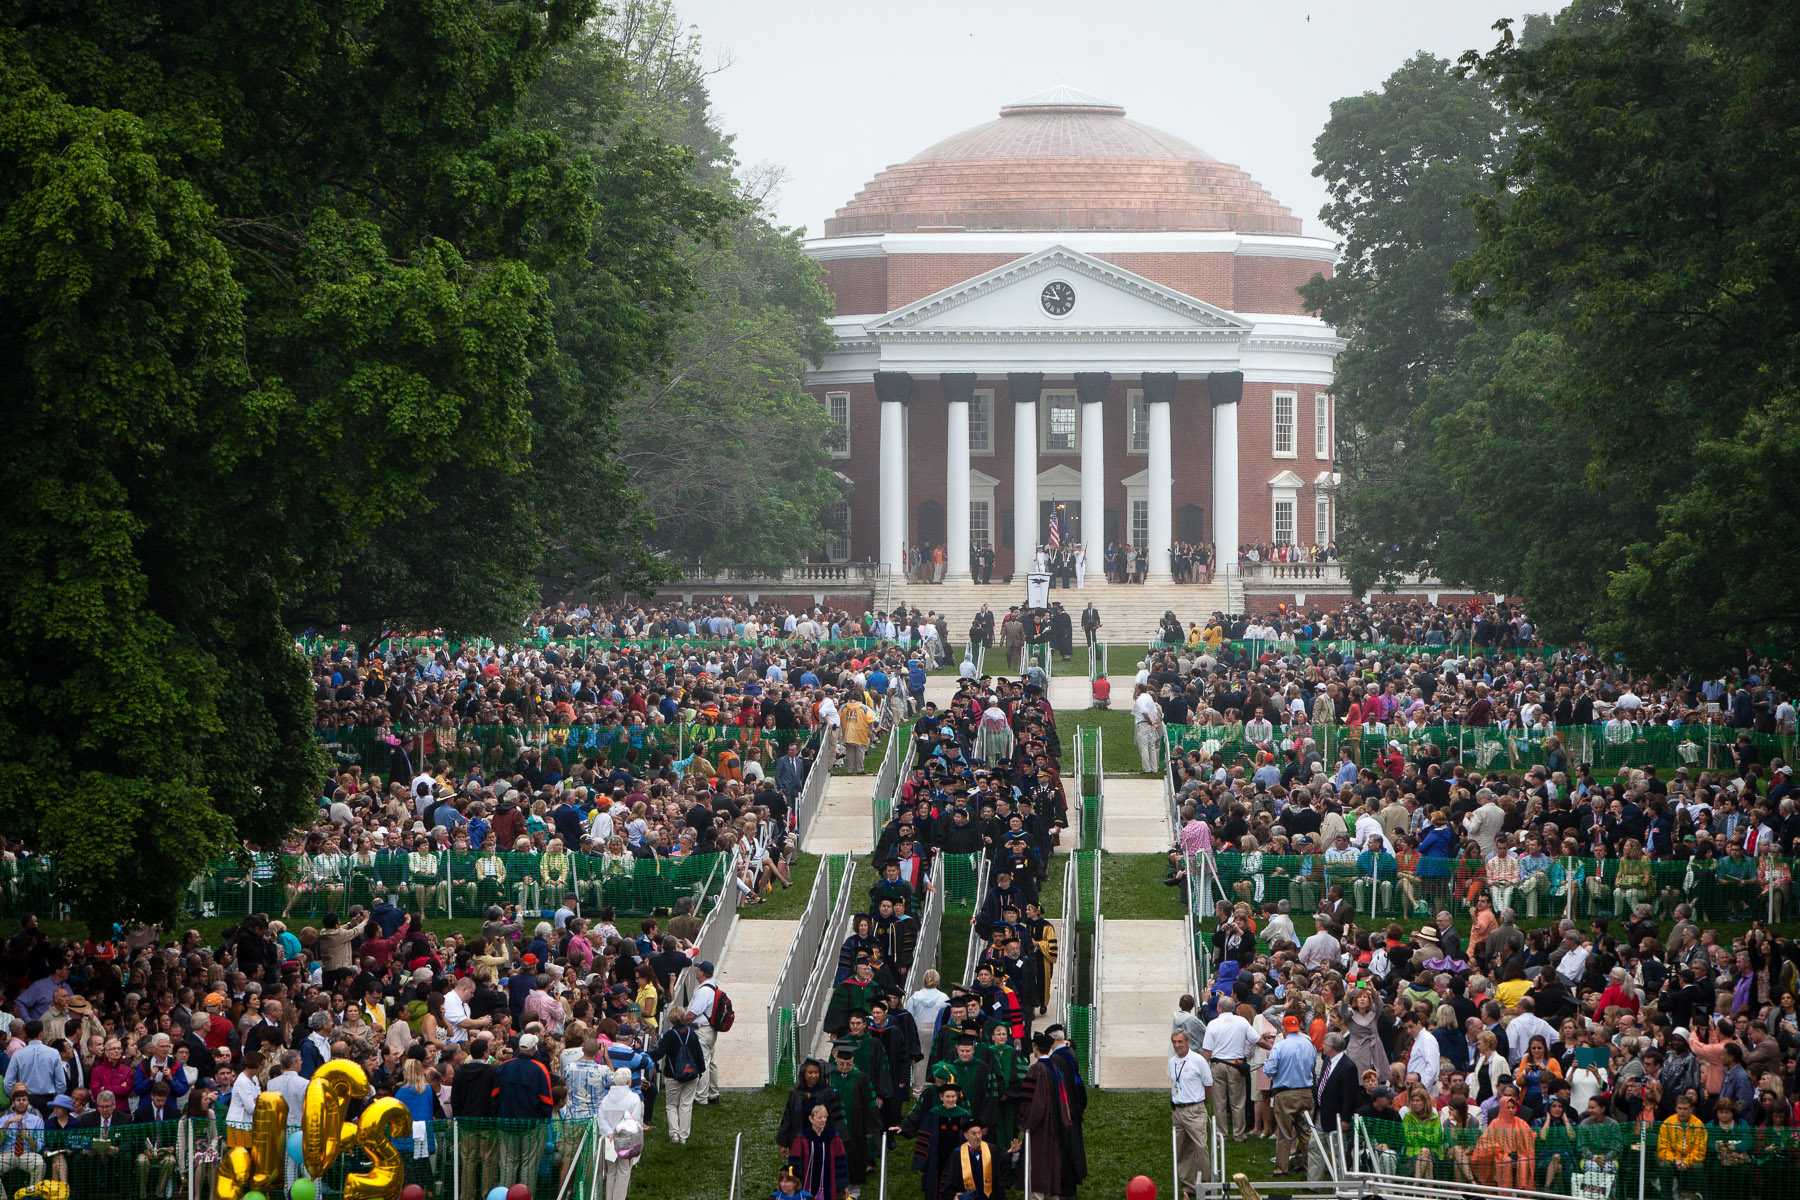 Aerial view of Graduates walking across the lawn from the Rotunda to their seats